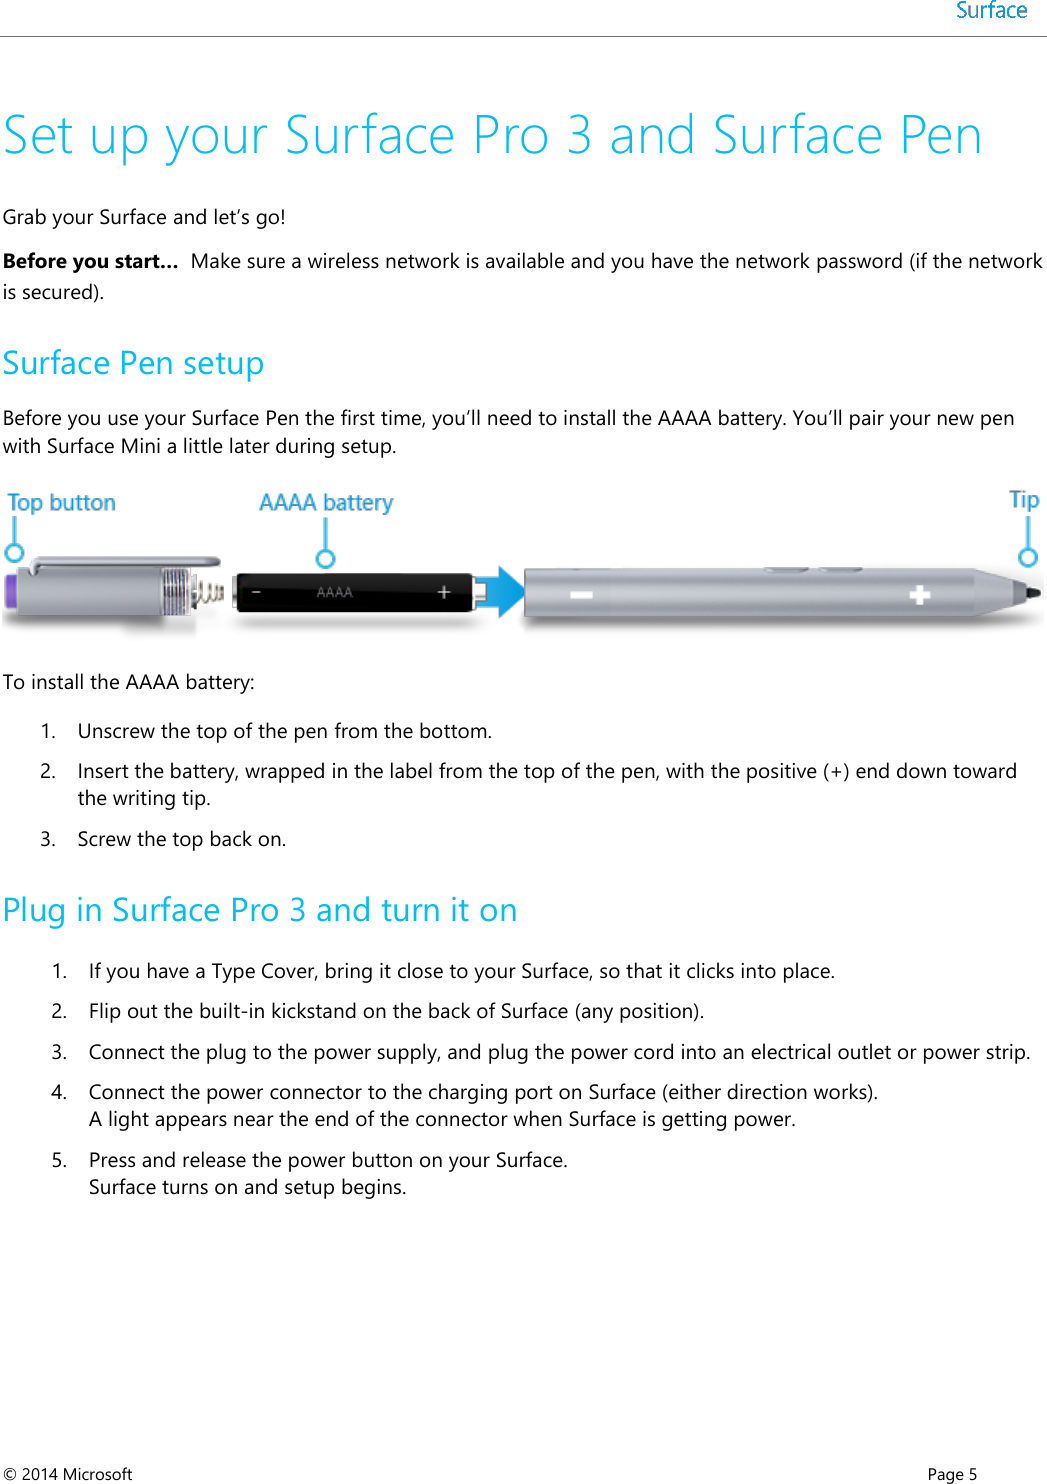  © 2014 Microsoft      Page 5  Set up your Surface Pro 3 and Surface Pen Grab your Surface and let’s go!  Before you start…  Make sure a wireless network is available and you have the network password (if the network is secured). Surface Pen setup Before you use your Surface Pen the first time, you’ll need to install the AAAA battery. You’ll pair your new pen with Surface Mini a little later during setup.  To install the AAAA battery: 1. Unscrew the top of the pen from the bottom.  2. Insert the battery, wrapped in the label from the top of the pen, with the positive (+) end down toward the writing tip.  3. Screw the top back on. Plug in Surface Pro 3 and turn it on  1. If you have a Type Cover, bring it close to your Surface, so that it clicks into place. 2. Flip out the built-in kickstand on the back of Surface (any position). 3. Connect the plug to the power supply, and plug the power cord into an electrical outlet or power strip.  4. Connect the power connector to the charging port on Surface (either direction works). A light appears near the end of the connector when Surface is getting power. 5. Press and release the power button on your Surface.  Surface turns on and setup begins. 